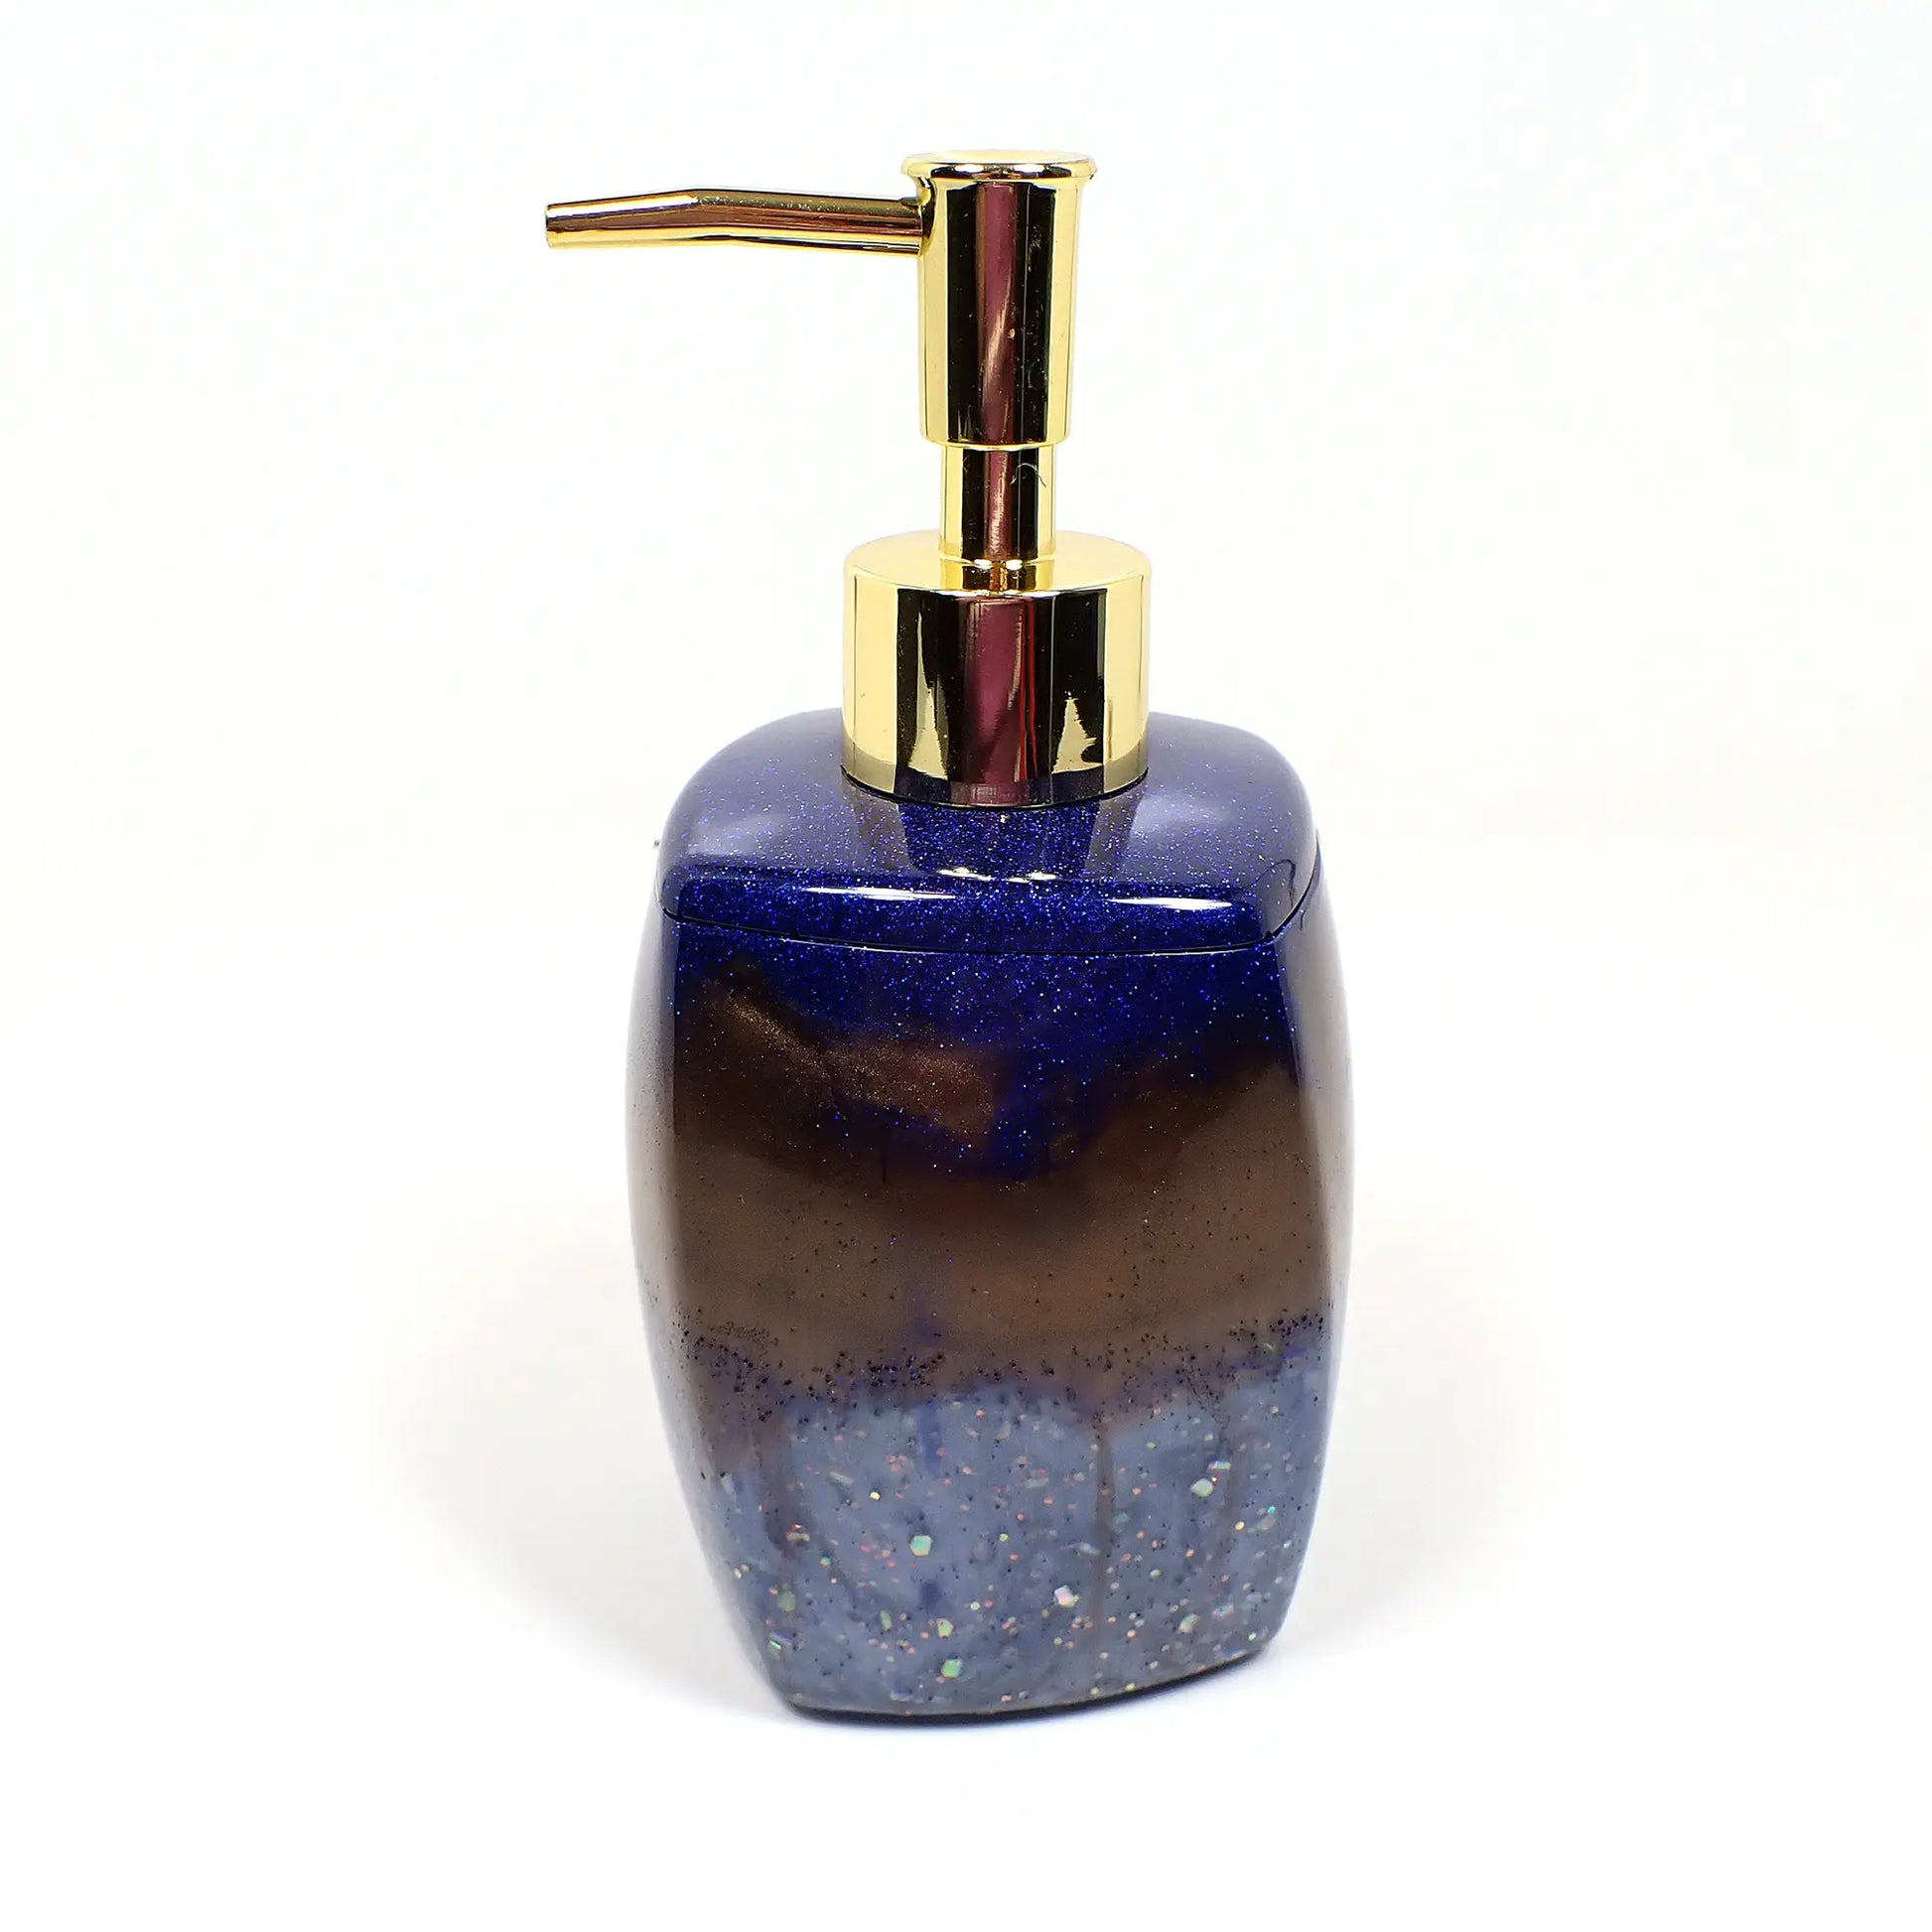 Side view of the handmade resin and glitter soap dispenser. It has a large rounded square design with a light twist to it. There is a gold tone metallic plastic pump style top. The top has pearly dark blue resin with tiny flecks of sparkling blue glitter, the middle area has swirls of pearly dark brown resin, and the bottom has pearly light blue resin with chunky iridescent glitter.